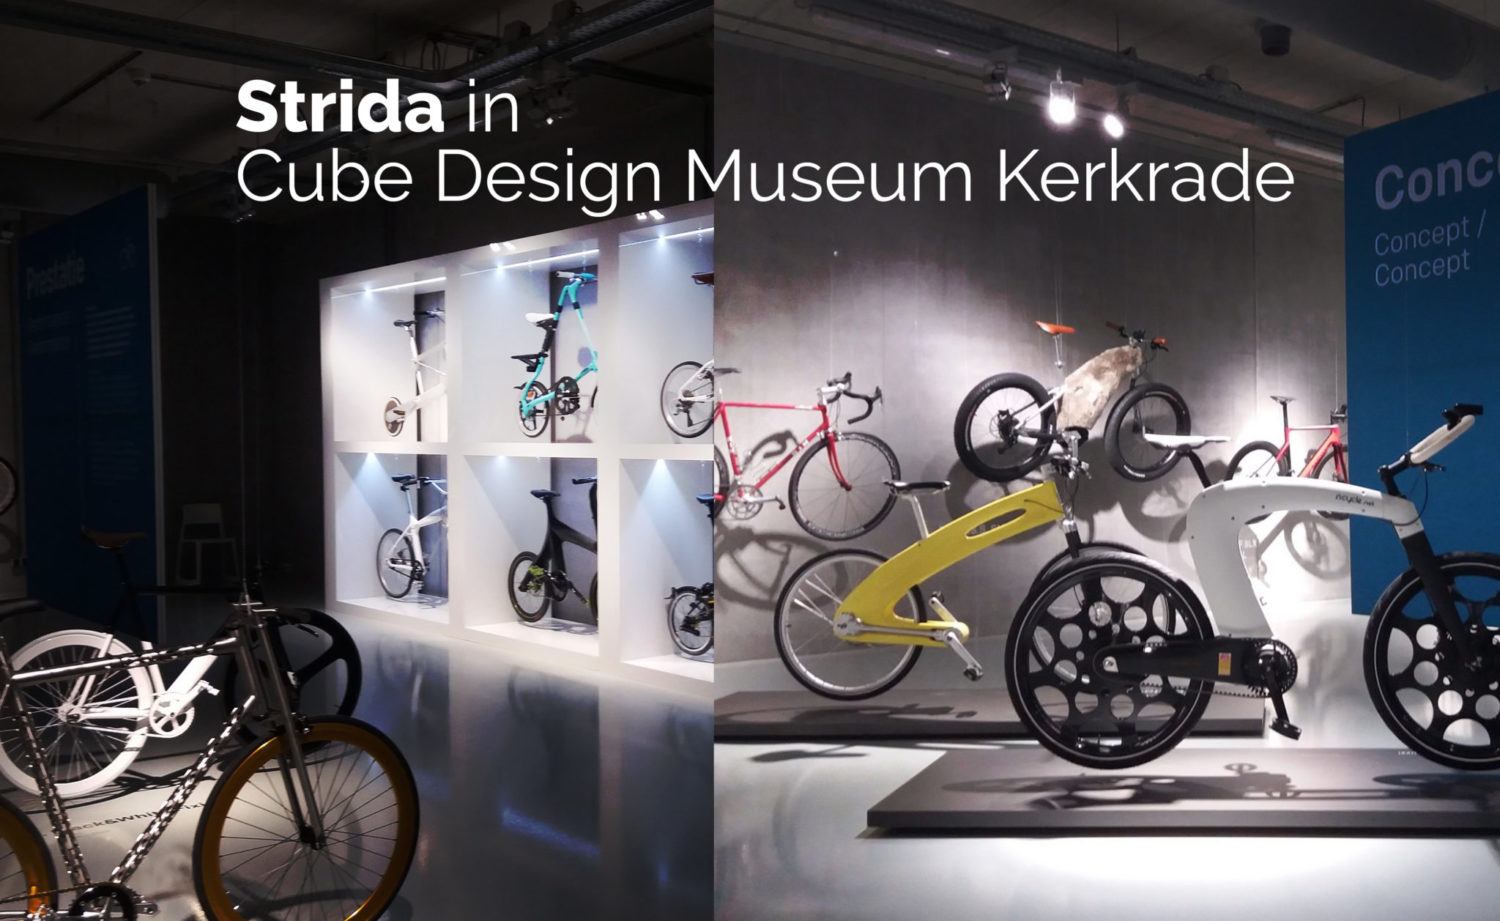 Strida in exhibition about bike design in the Cube Design Museum